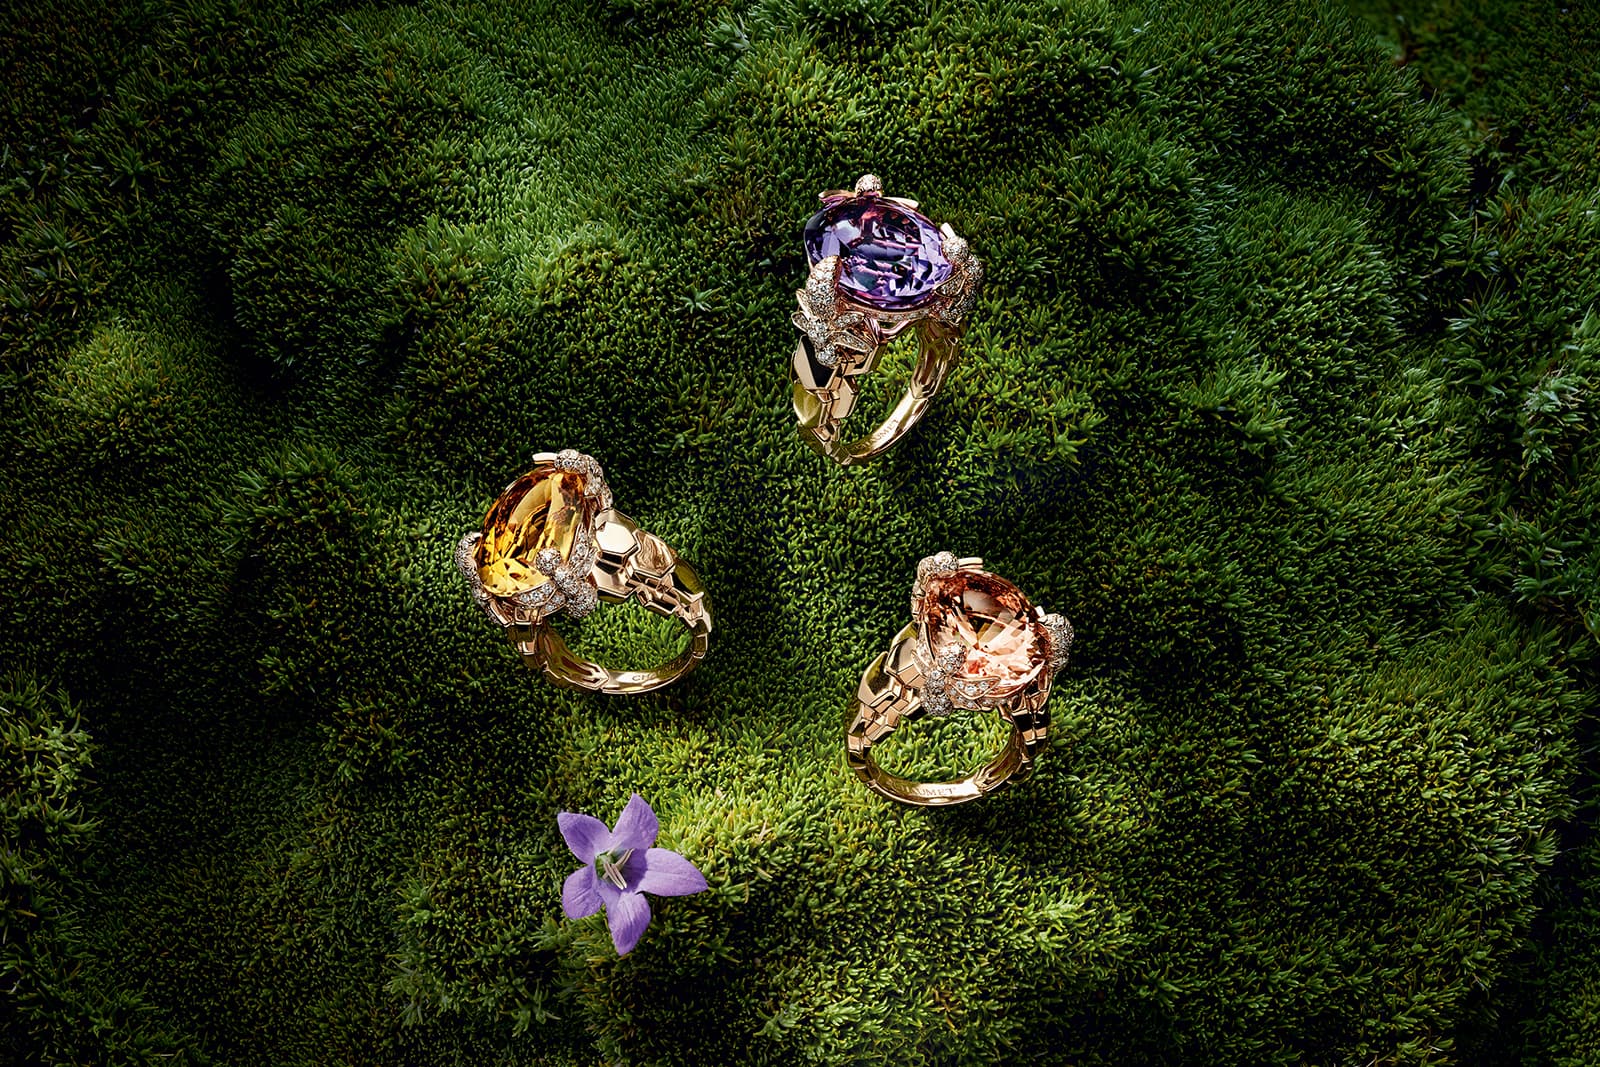 Chaumet 'Bee My Love' rings with yellow sapphire, morganite and amethyst all accented with diamonds in rose gold